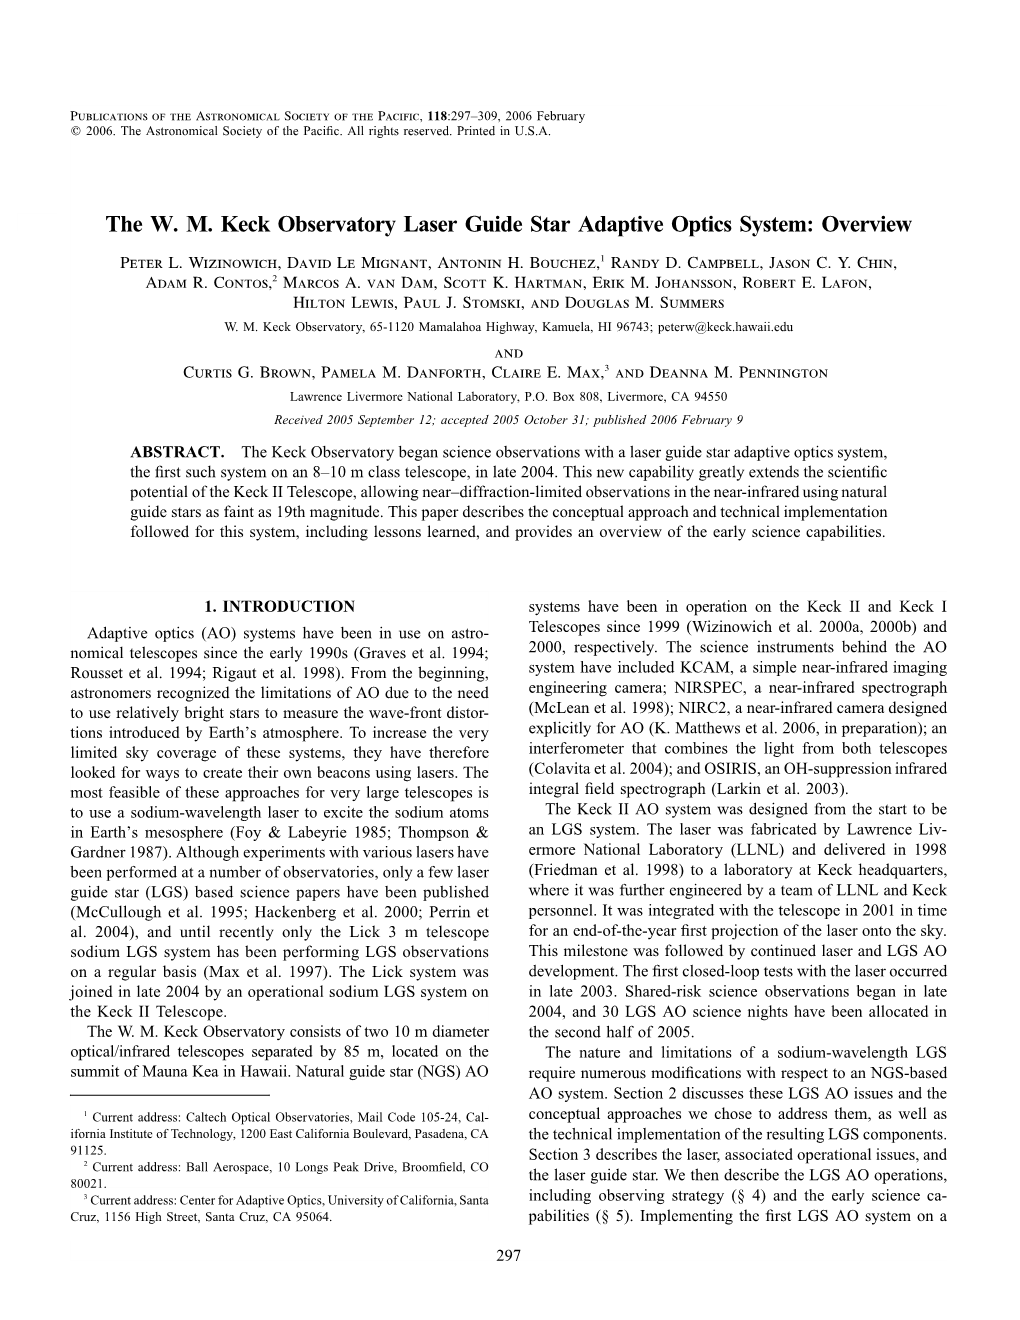 The W. M. Keck Observatory Laser Guide Star Adaptive Optics System: Overview